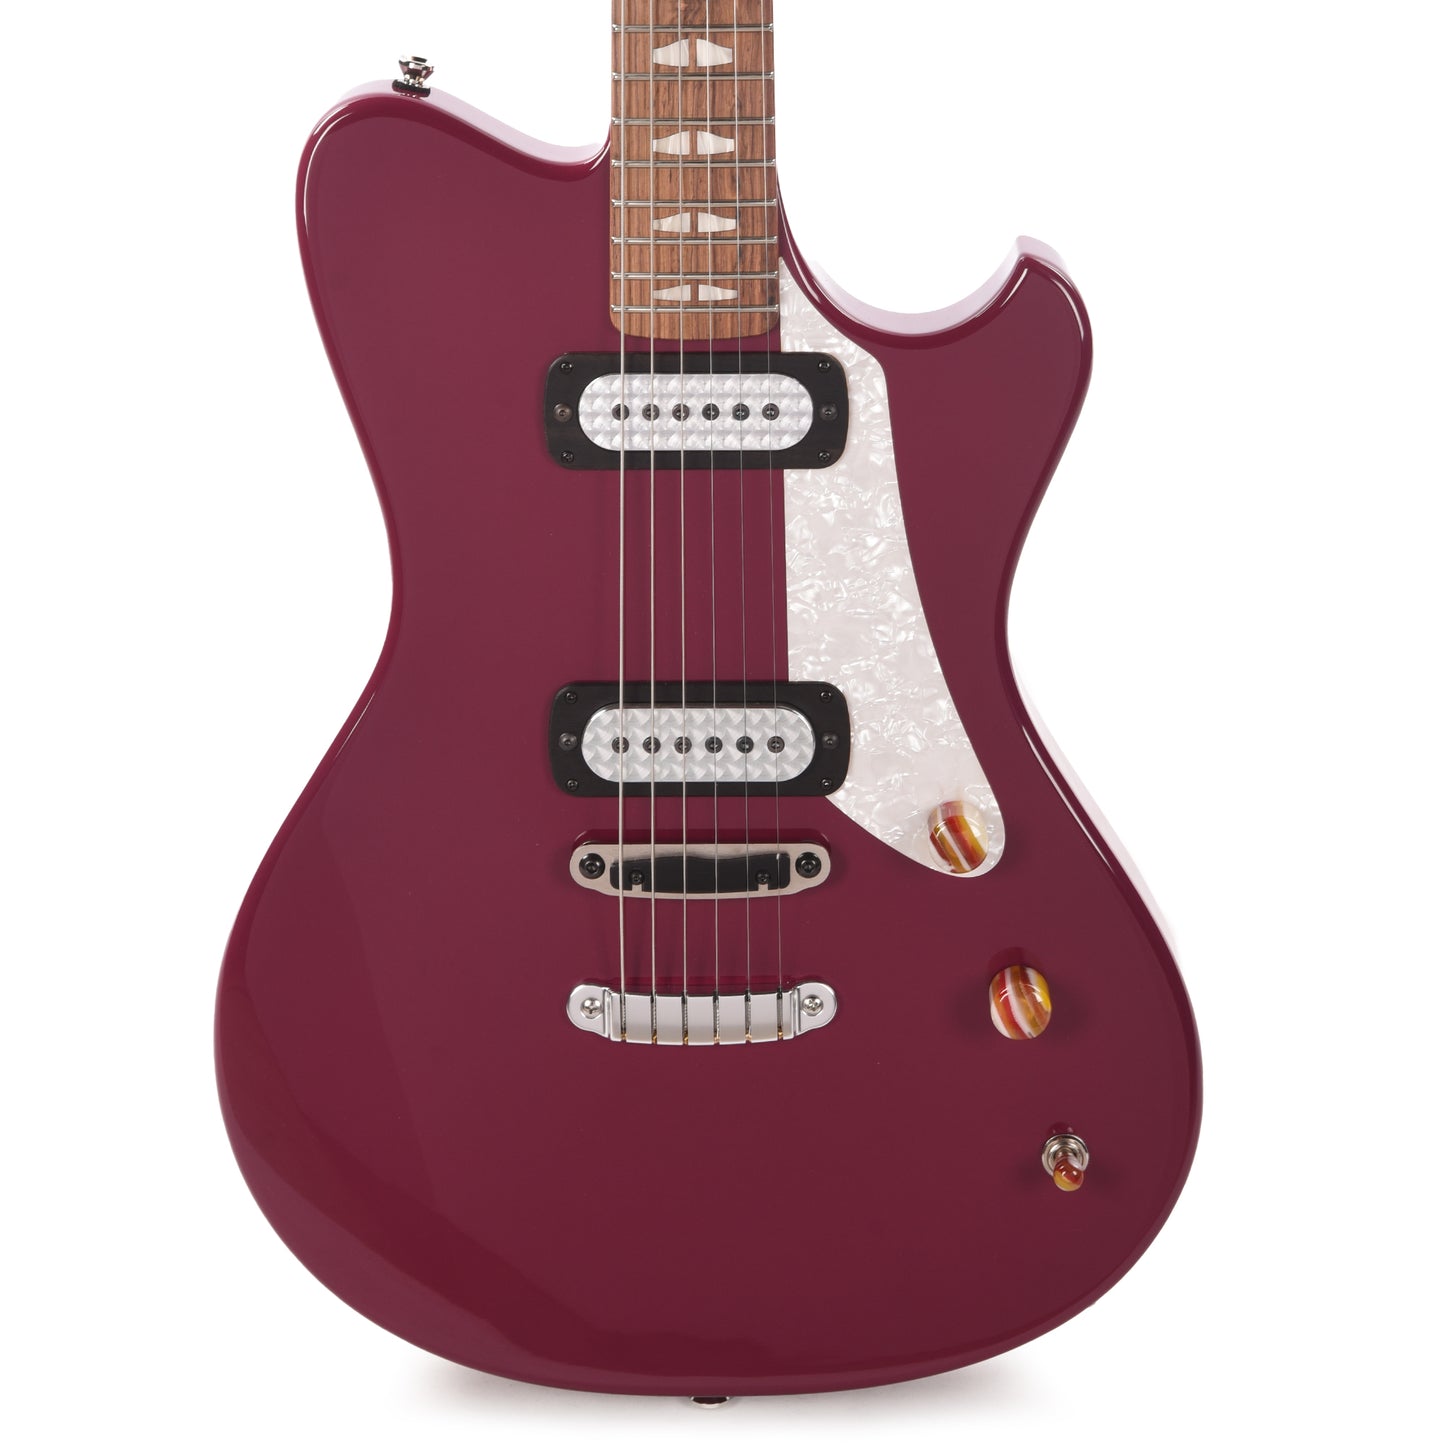 Powers Electric A-Type Hard Tail Ruby Star w/FF42 Pickups